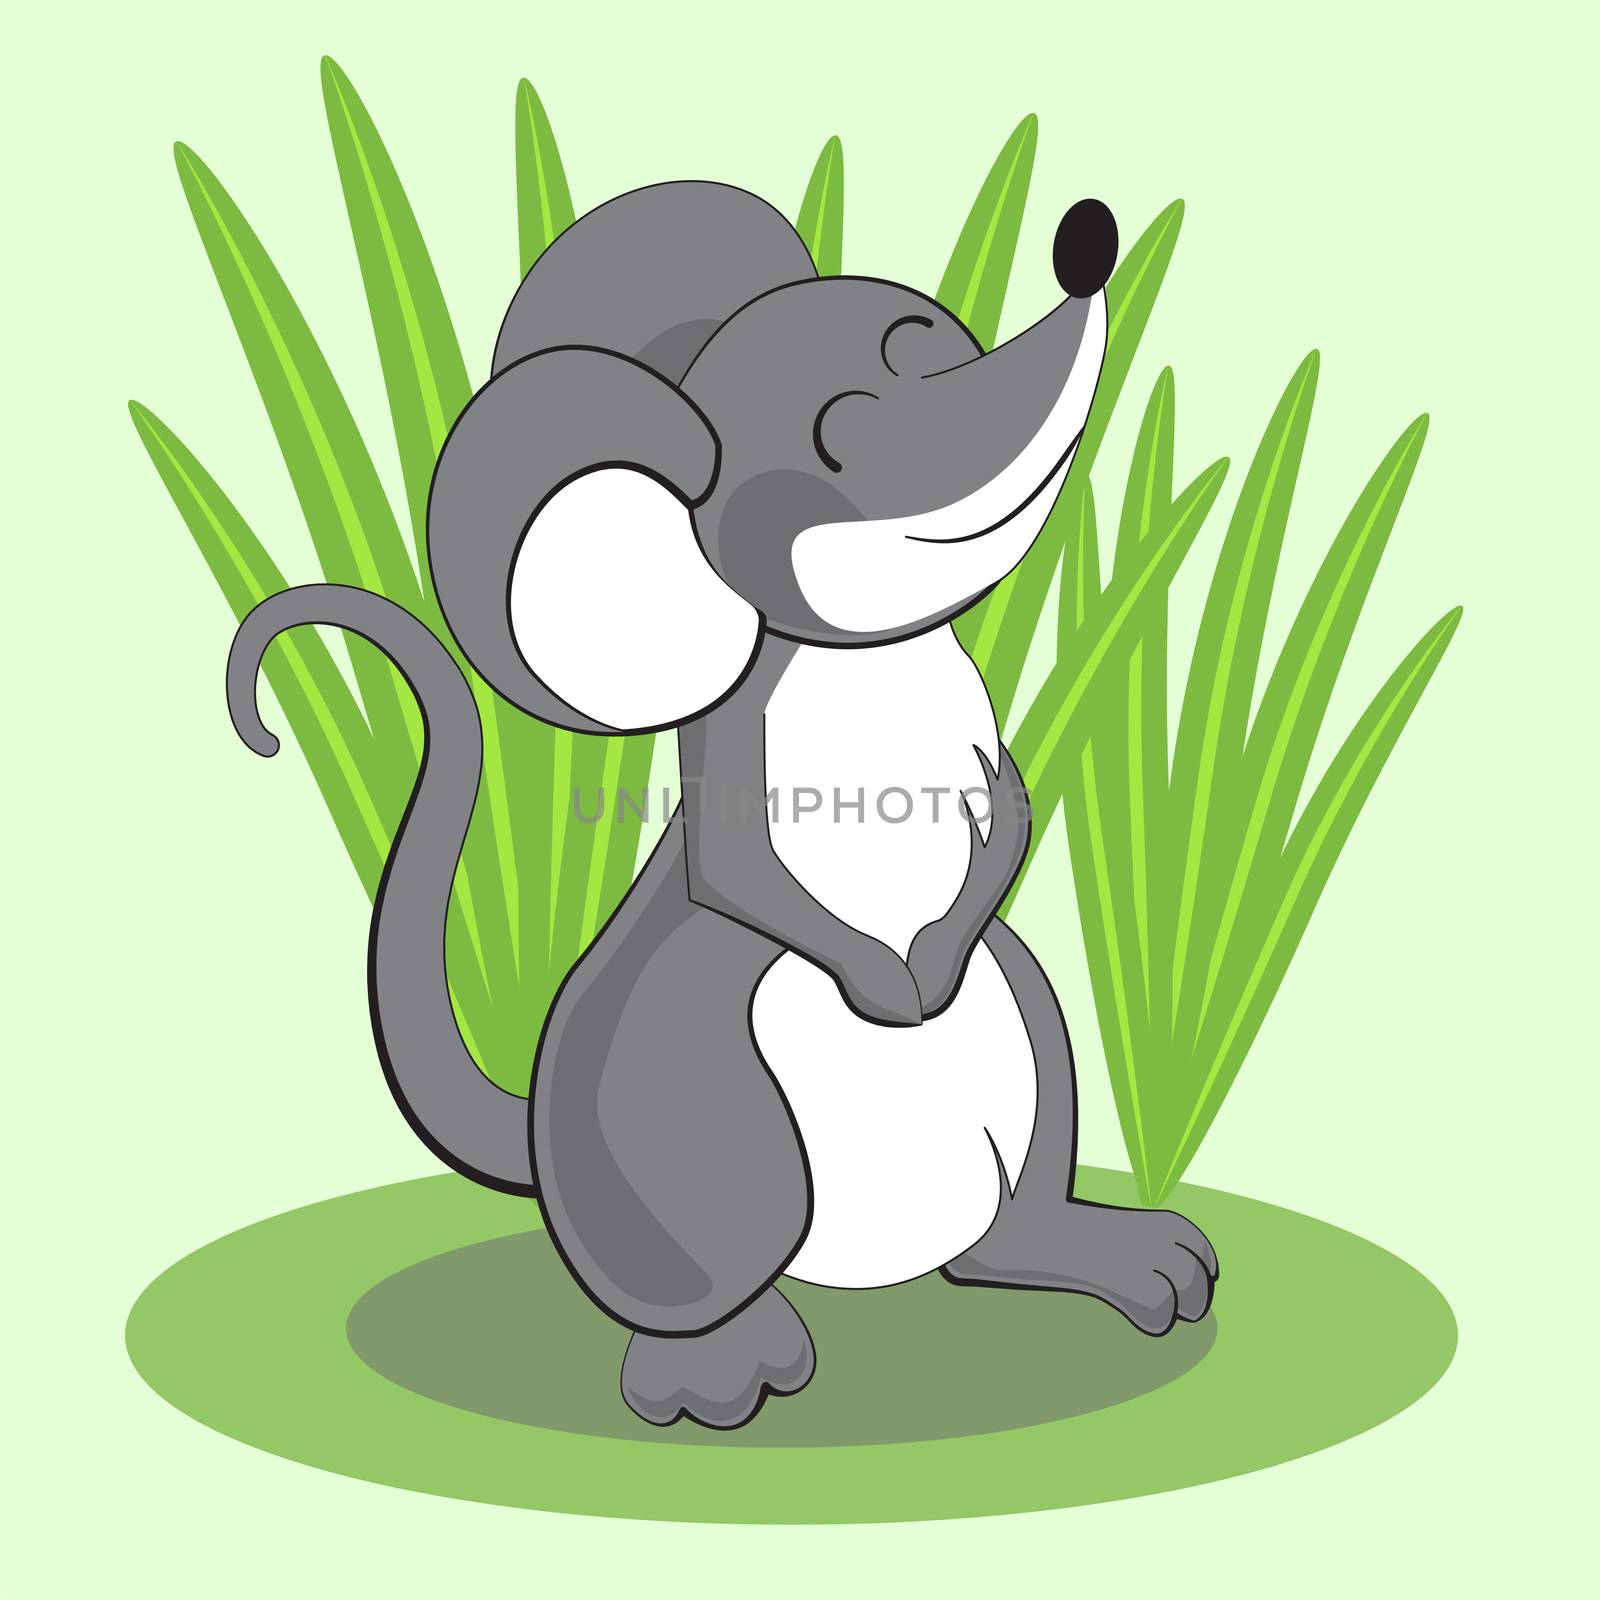 Beautiful cartoon mouse standing on grass and smiling. illustration